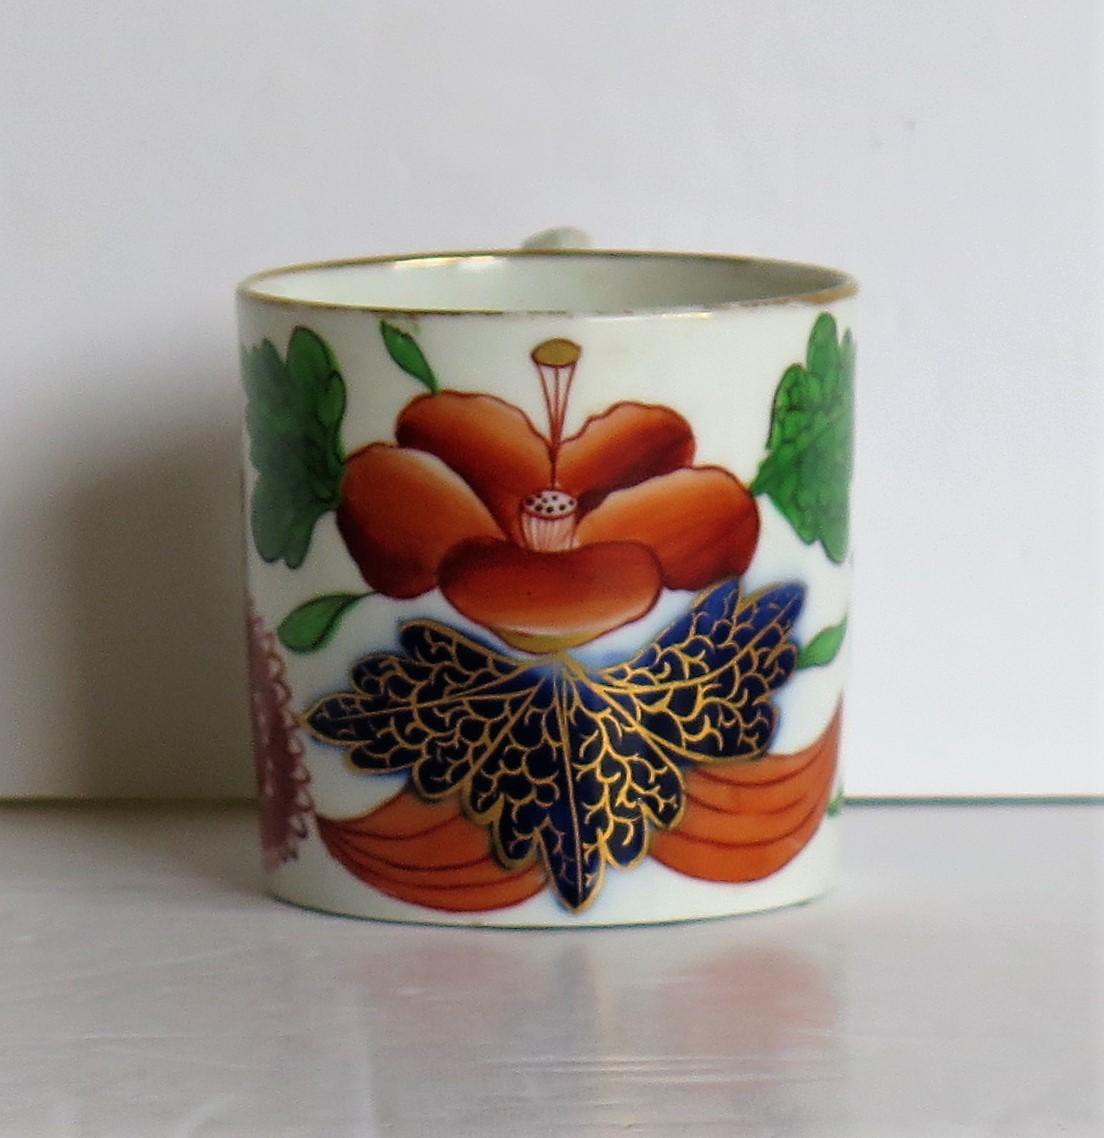 This is a good quality coffee can that we attribute to the coalport porcelain works, Shropshire, England, made during the John Rose period of the George 111rd years, circa 1805-1810.

The coffee can is nominally parallel, tapering slightly to the